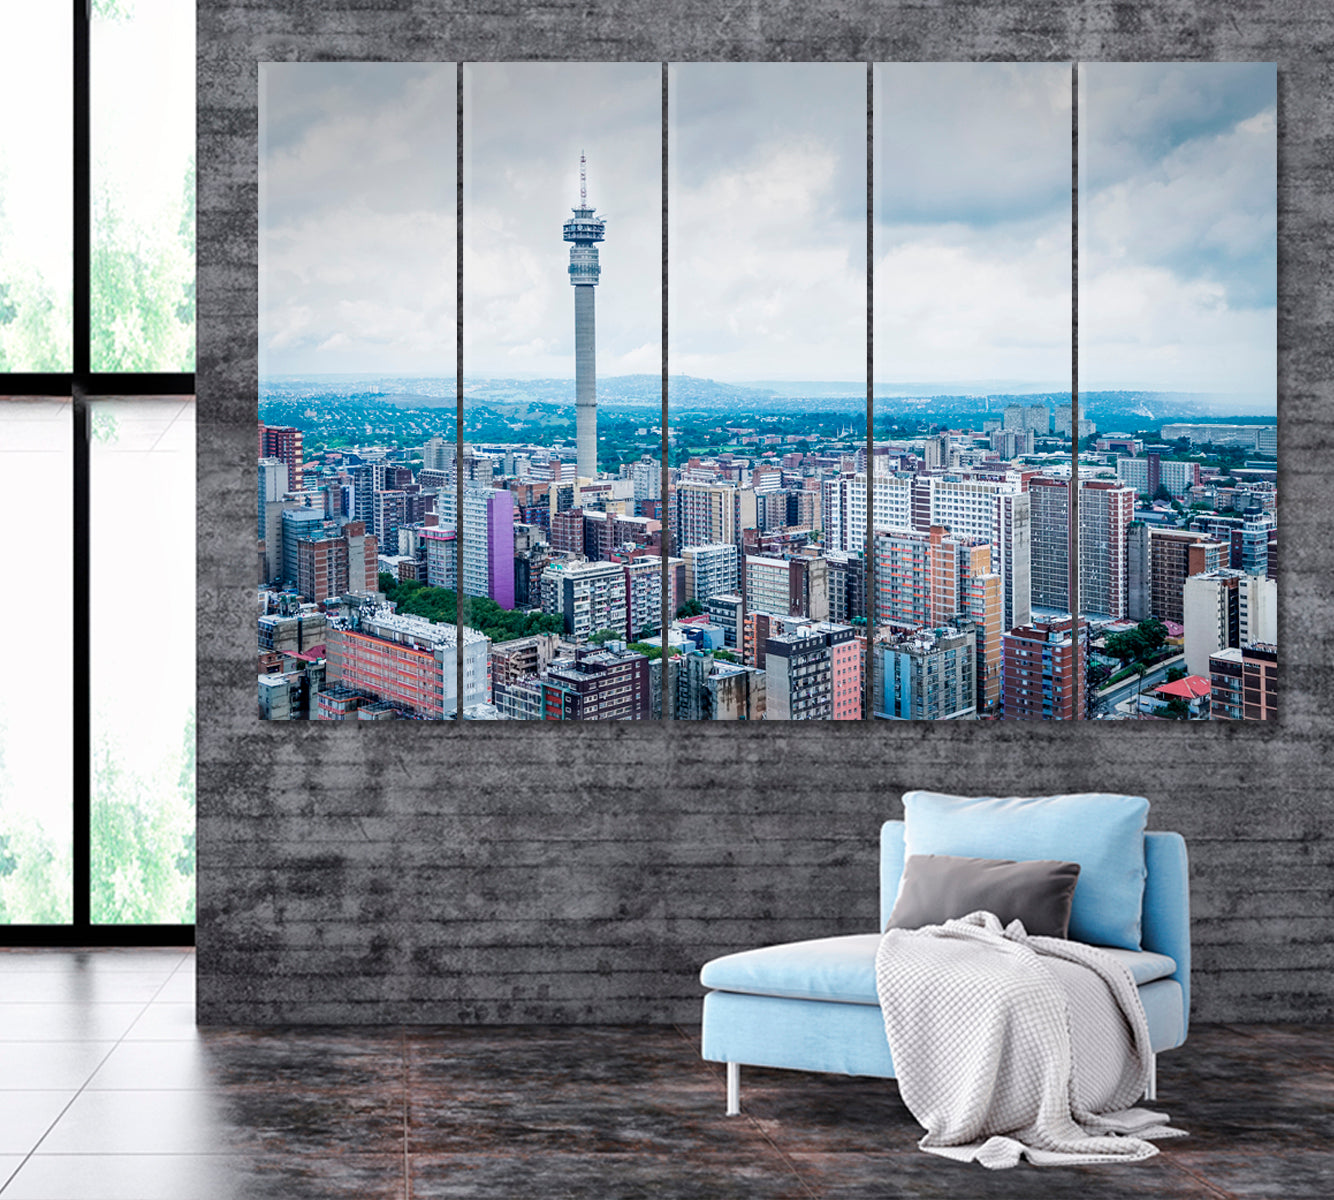 Johannesburg South Africa Canvas Print ArtLexy 5 Panels 36"x24" inches 